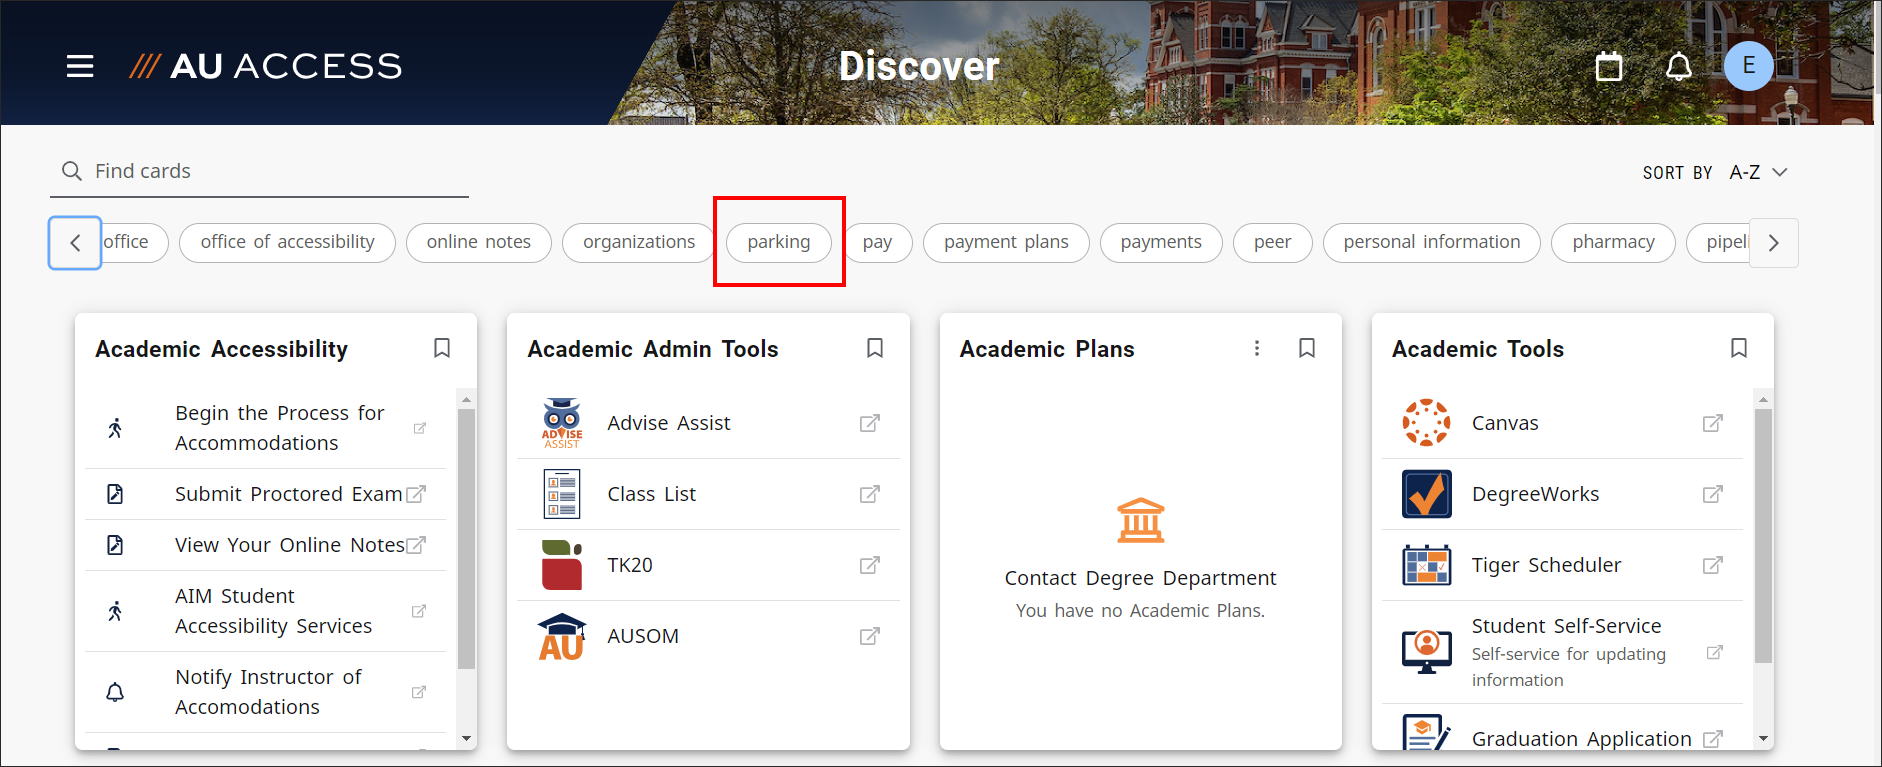 Discover keyword search and filter